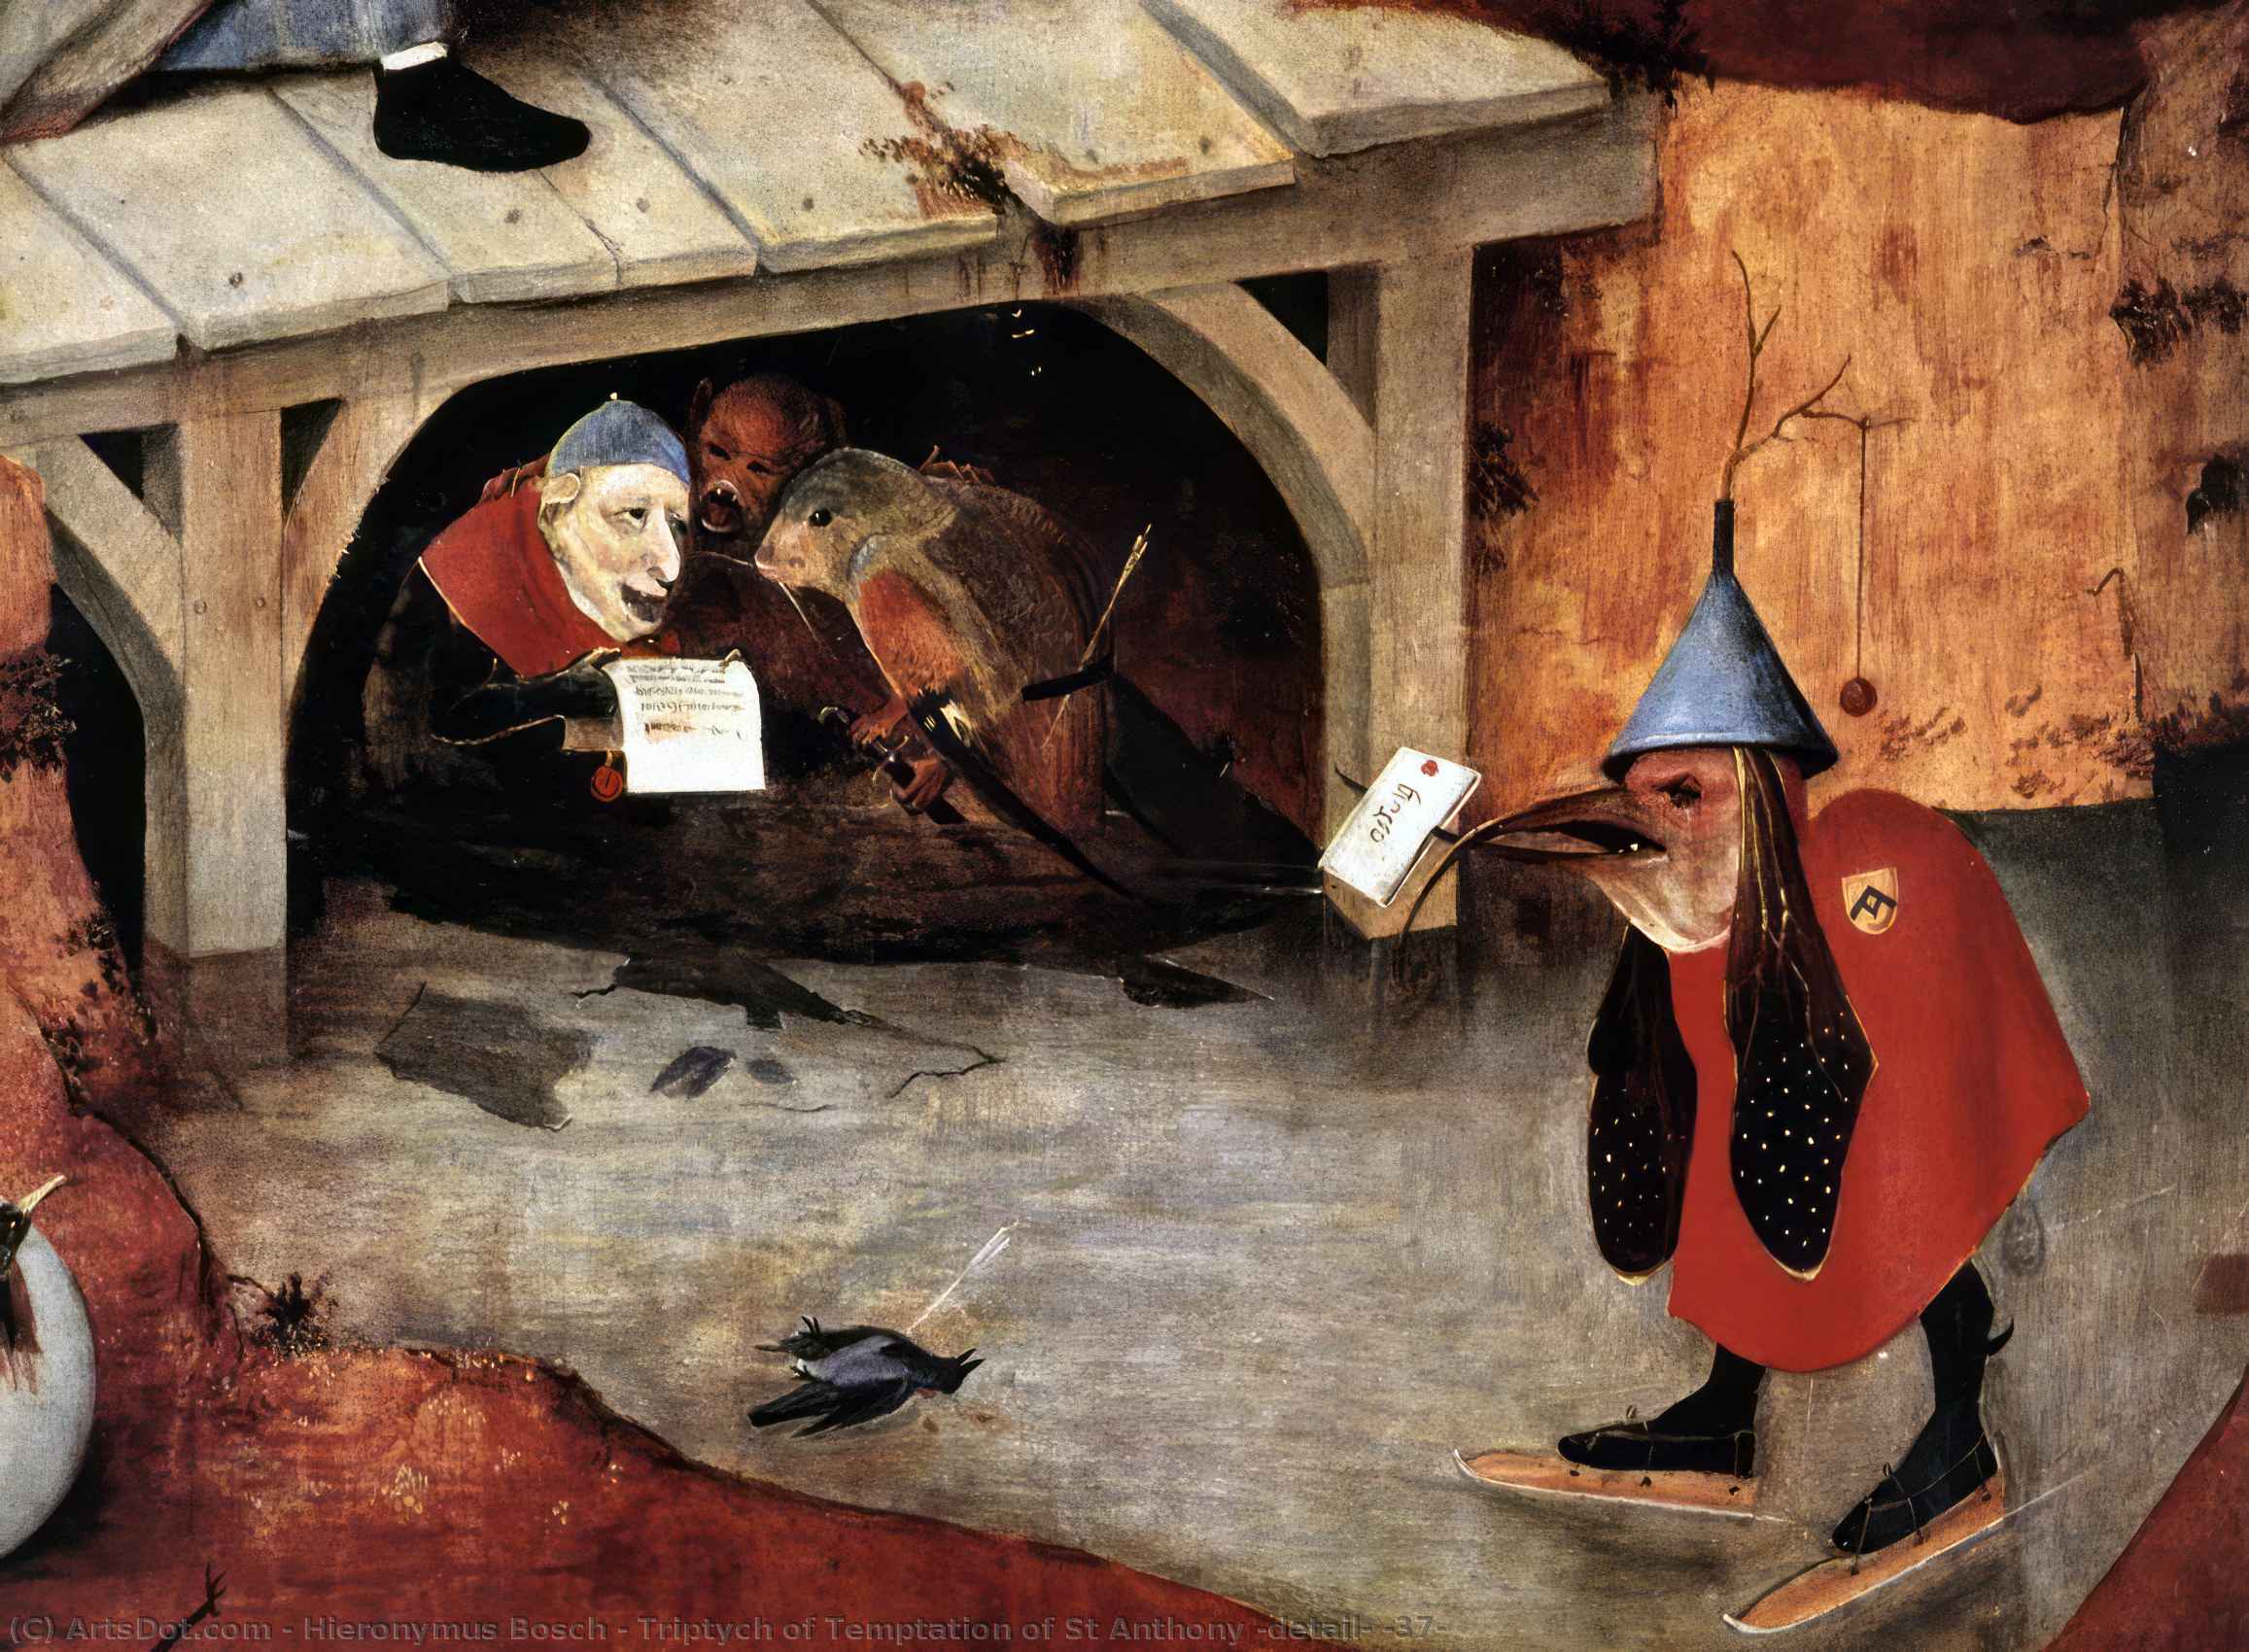 WikiOO.org - 백과 사전 - 회화, 삽화 Hieronymus Bosch - Triptych of Temptation of St Anthony (detail) (37)